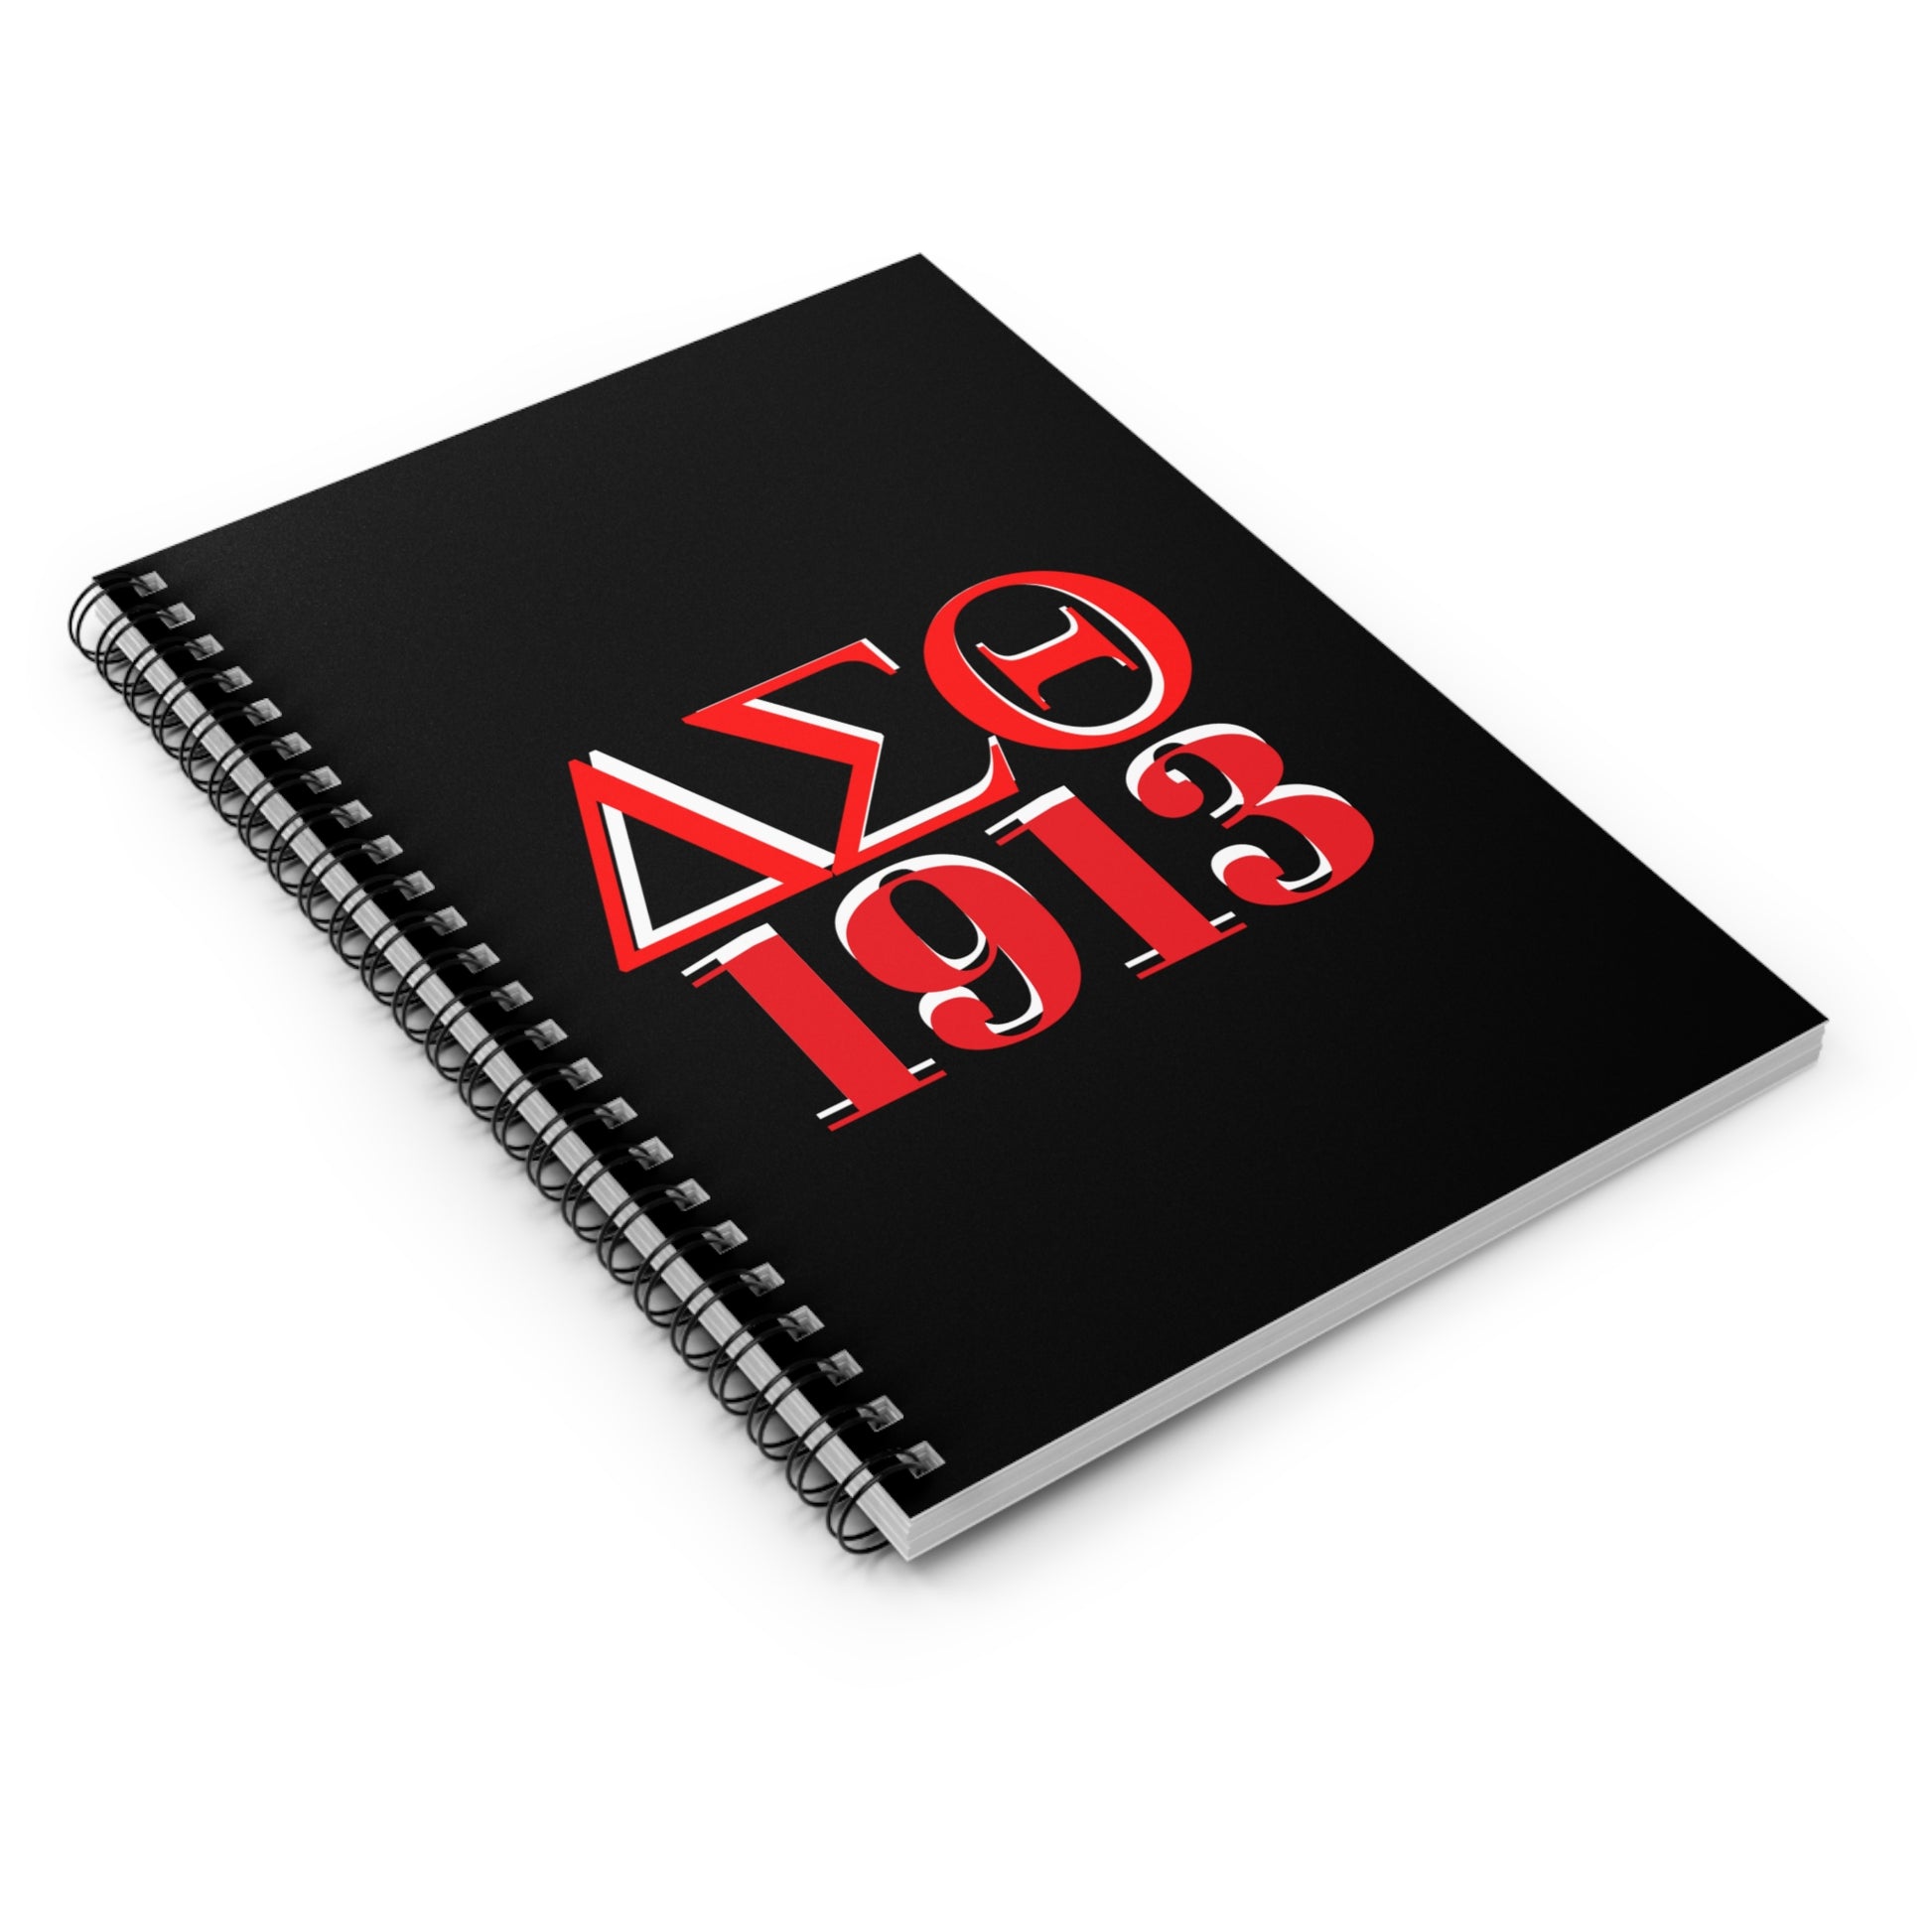 Red and White 1913 DST Spiral Notebook - Ruled Line